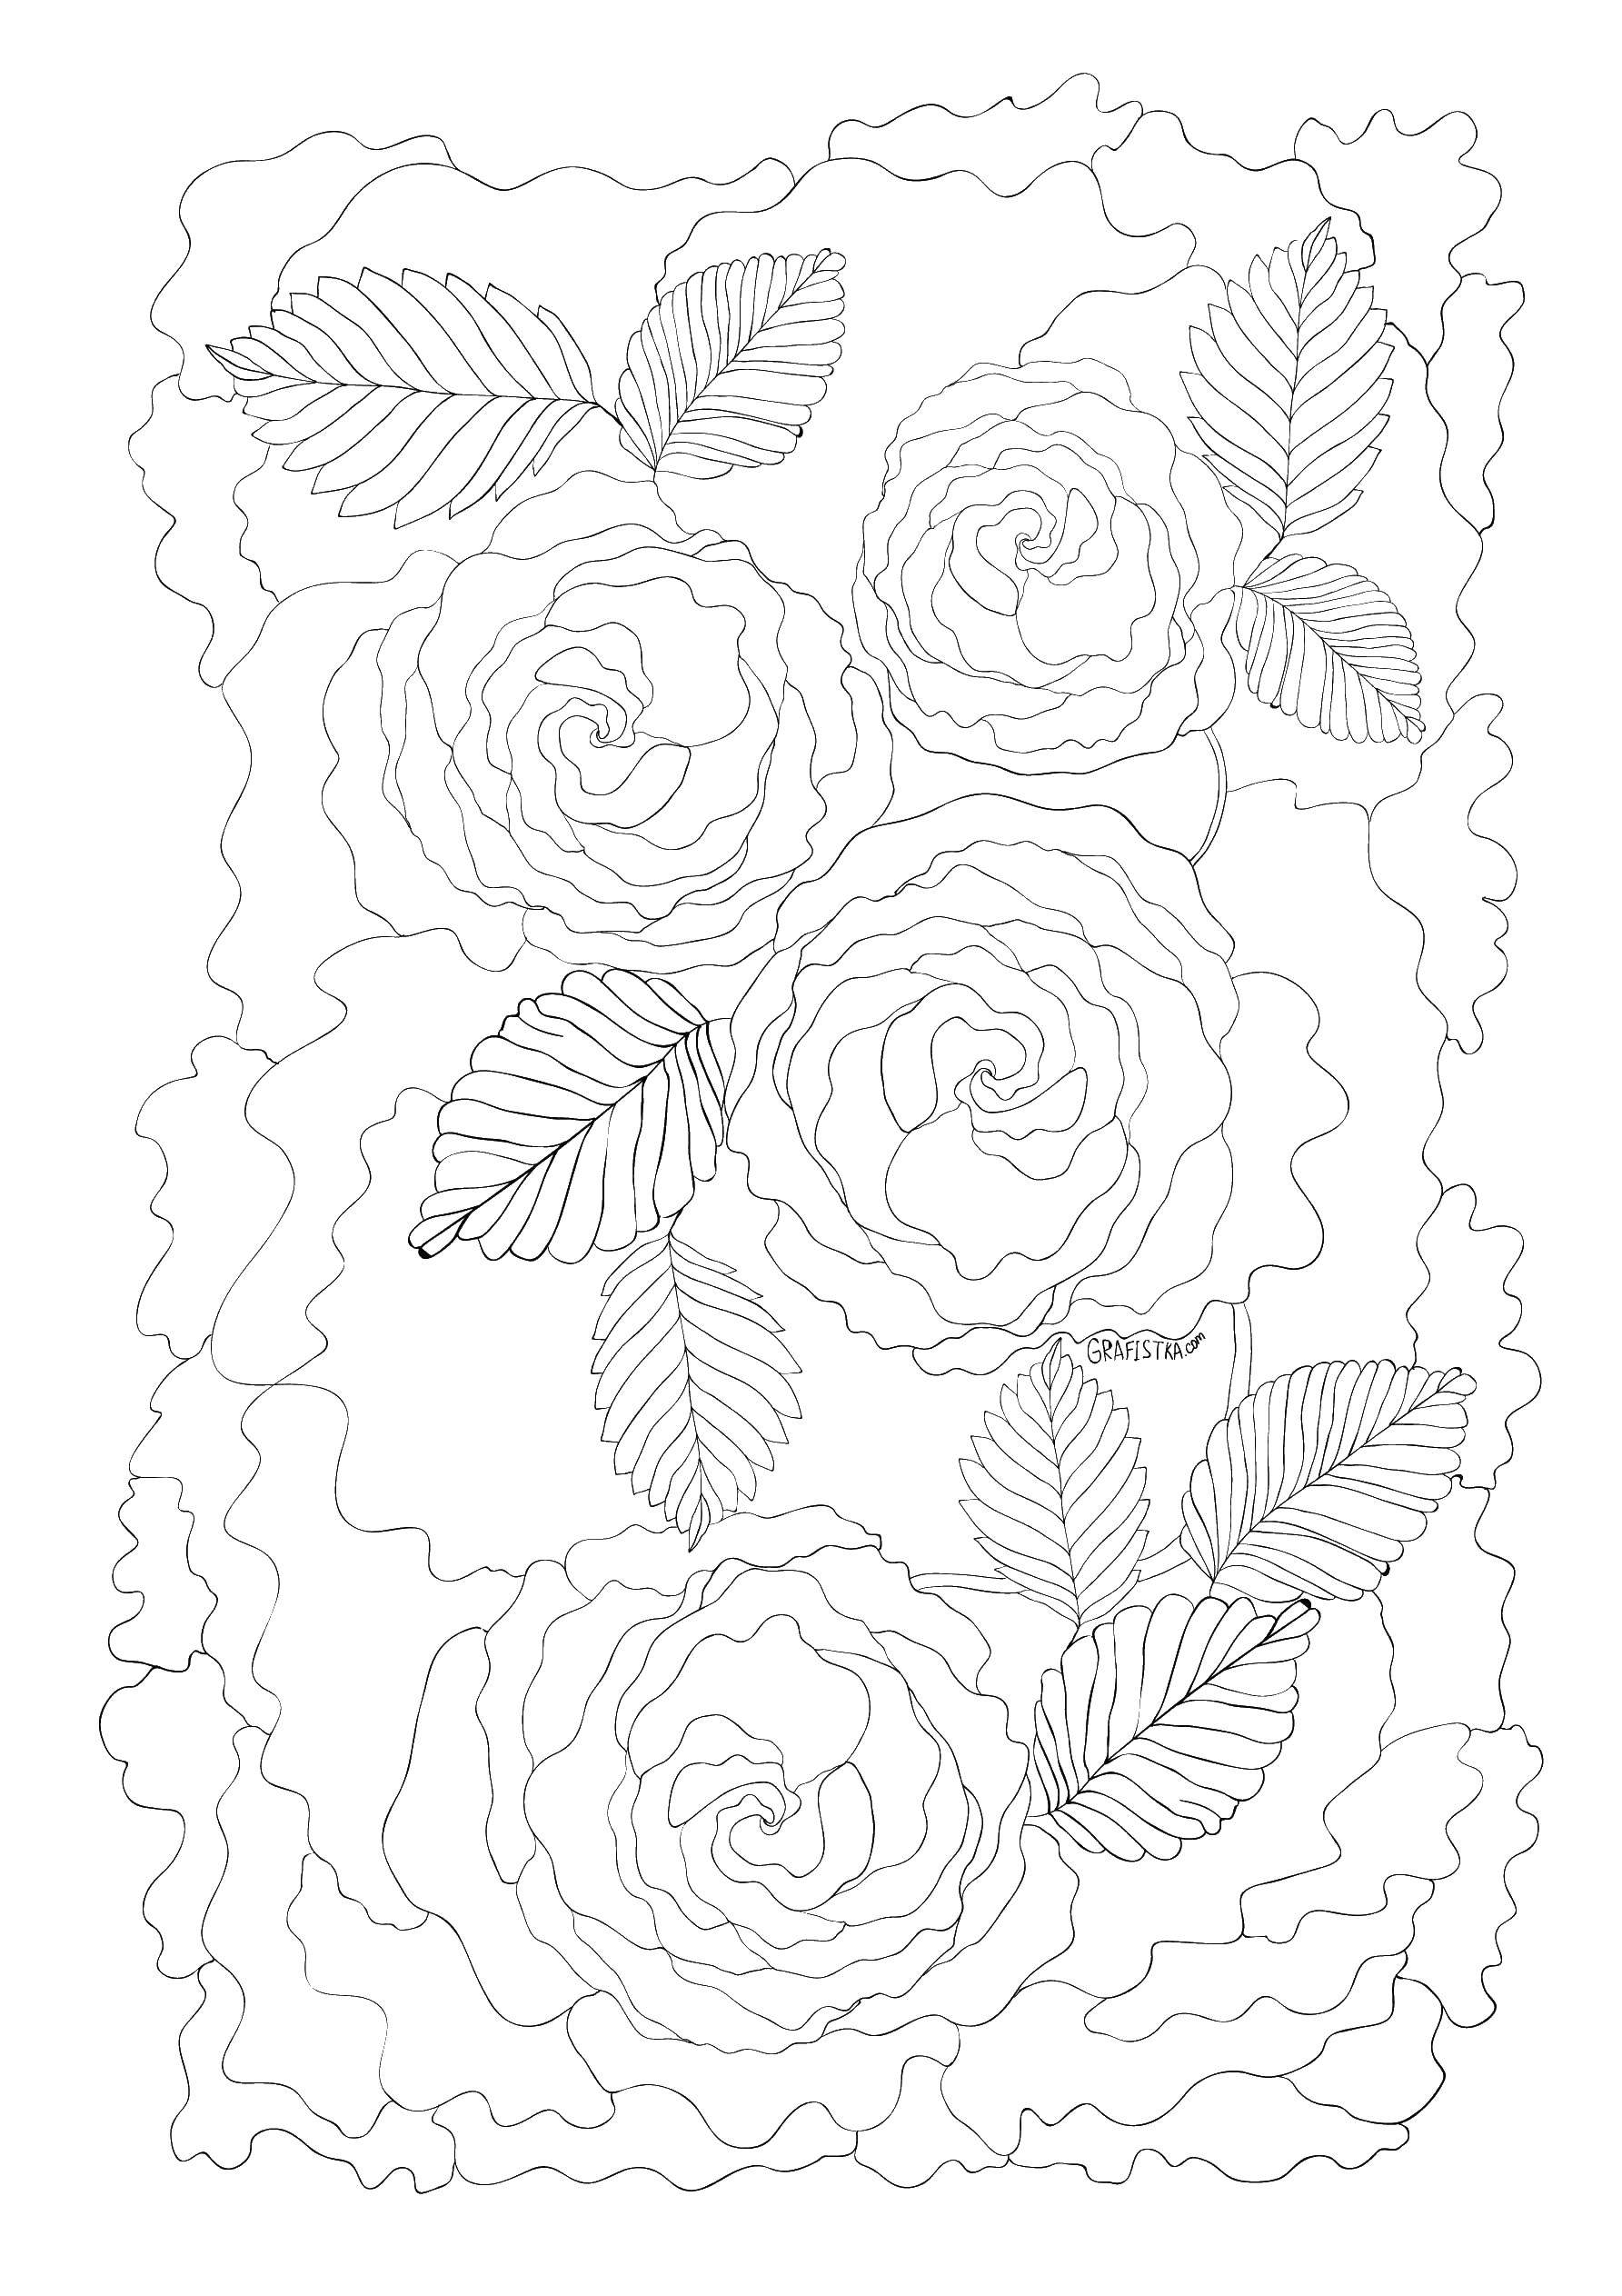 Coloring Roses. Category flowers. Tags:  roses.